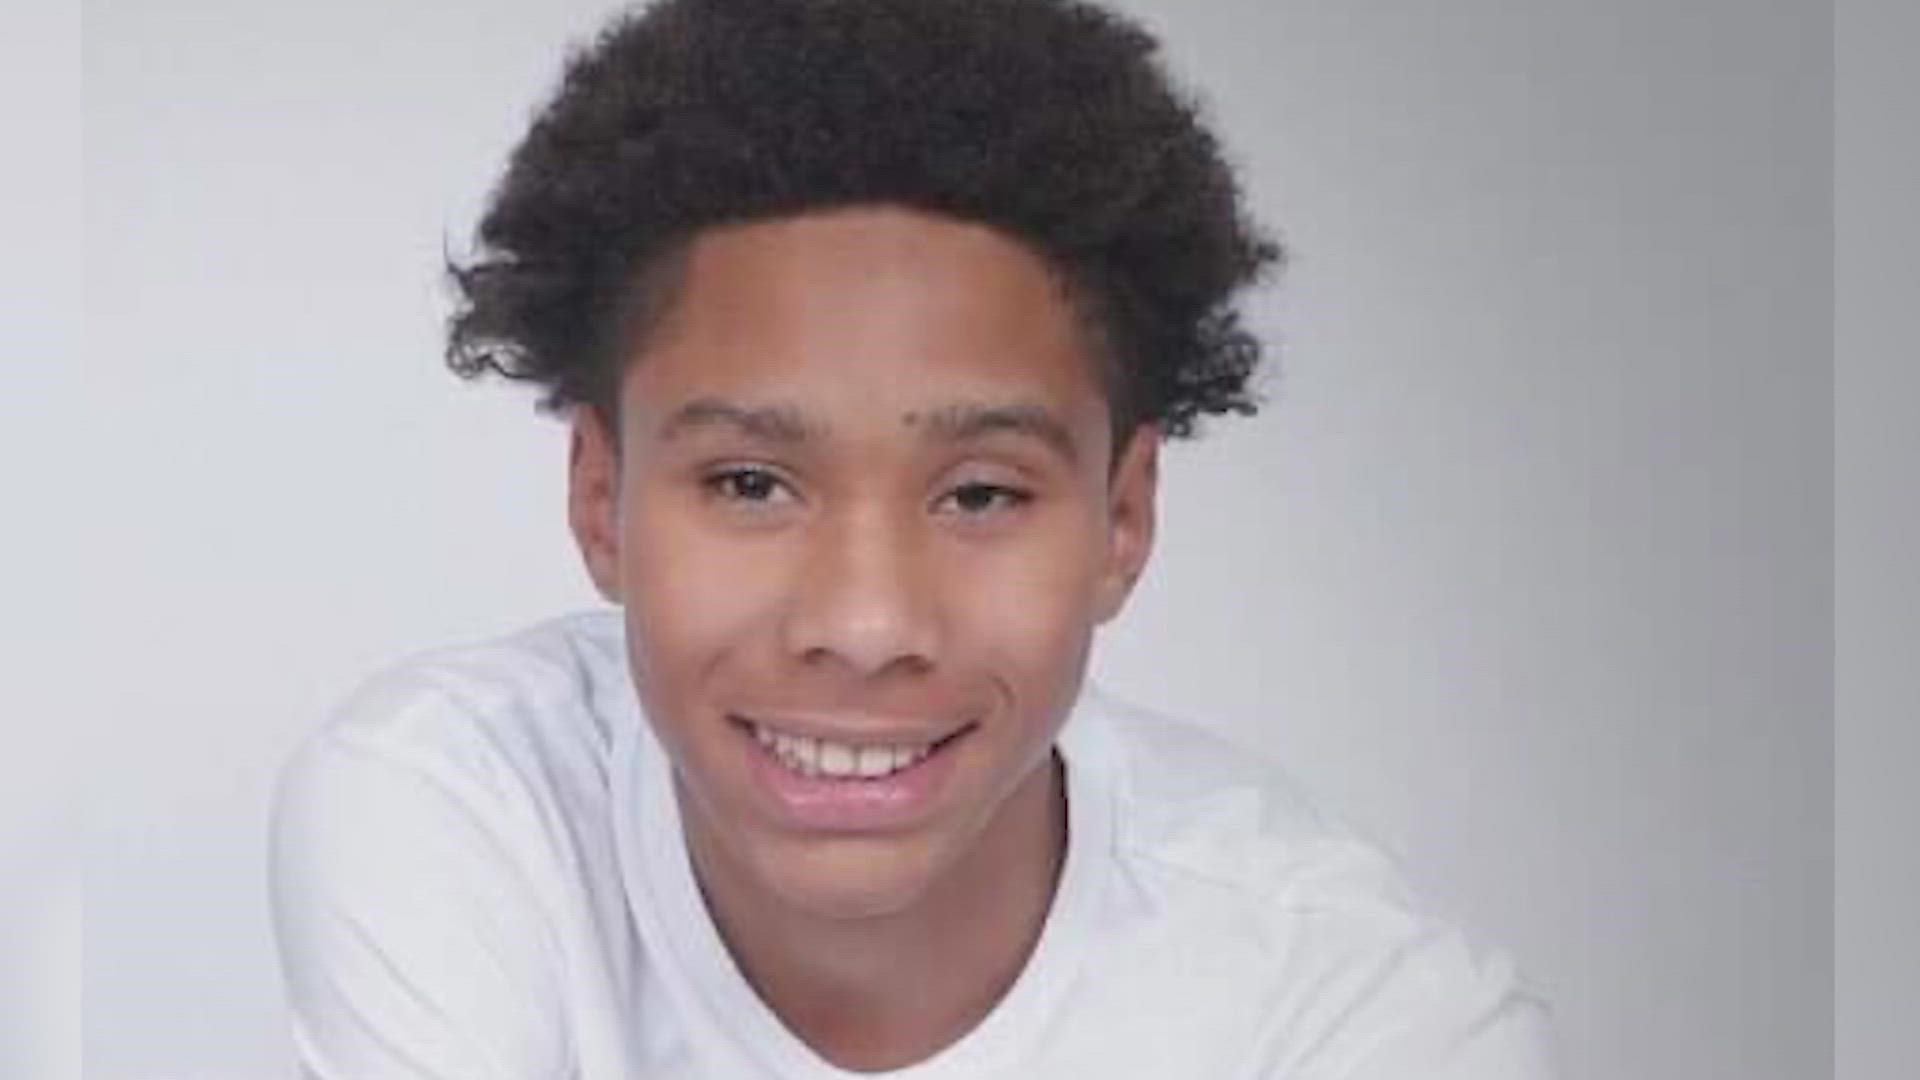 Adrian Daniels, 14, and a 17-year-old were killed in a shooting that also left another person injured.